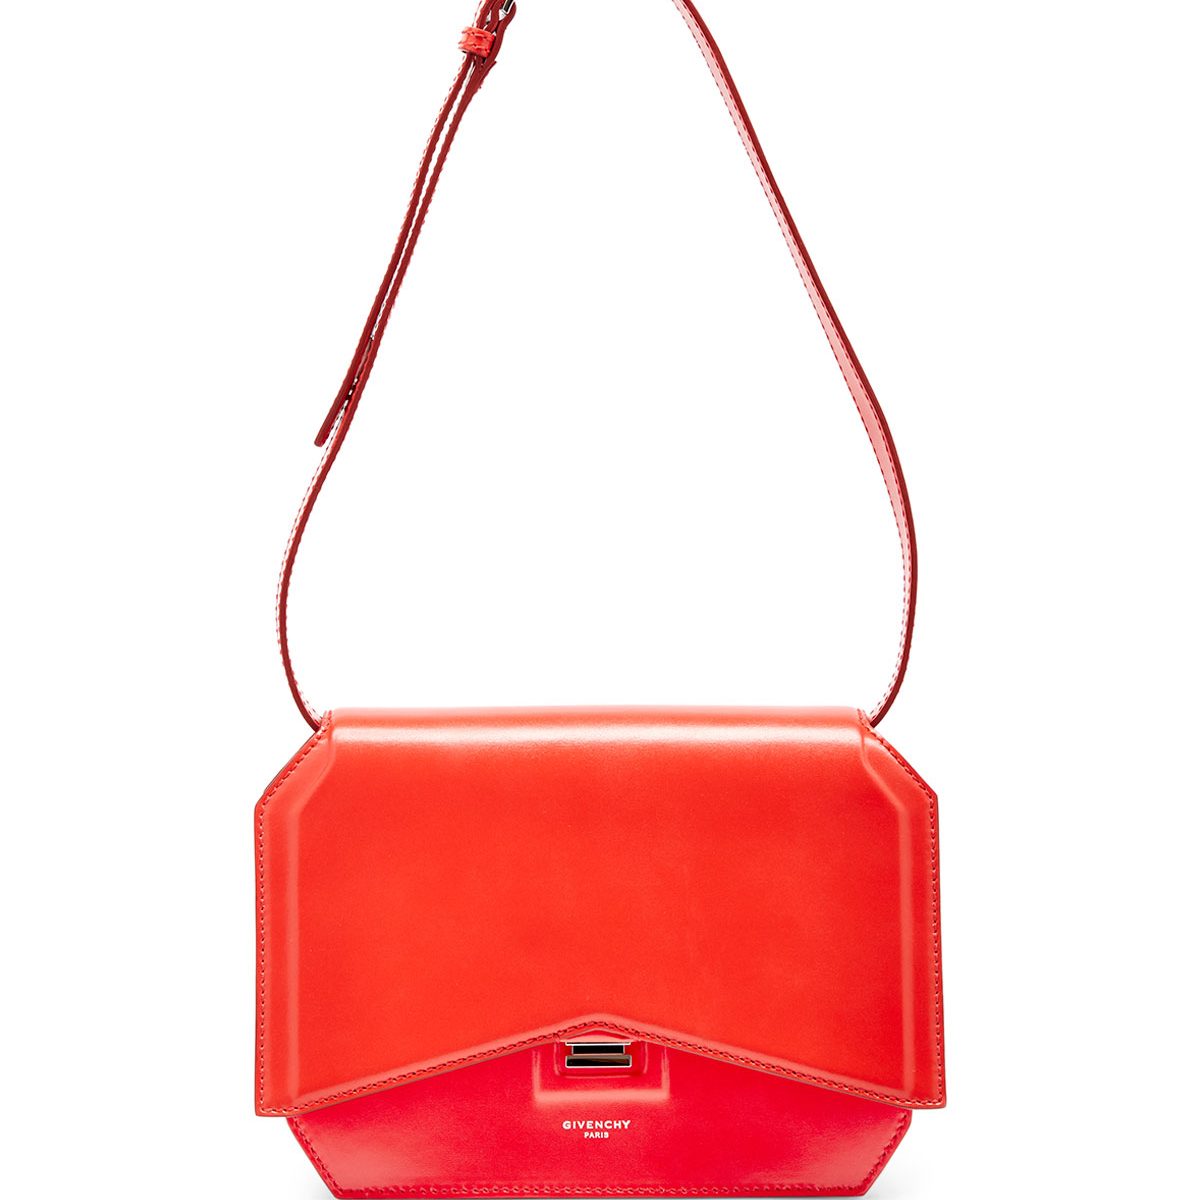 Givenchy Bow Cut Shoulder Bag Reference Guide - Spotted Fashion